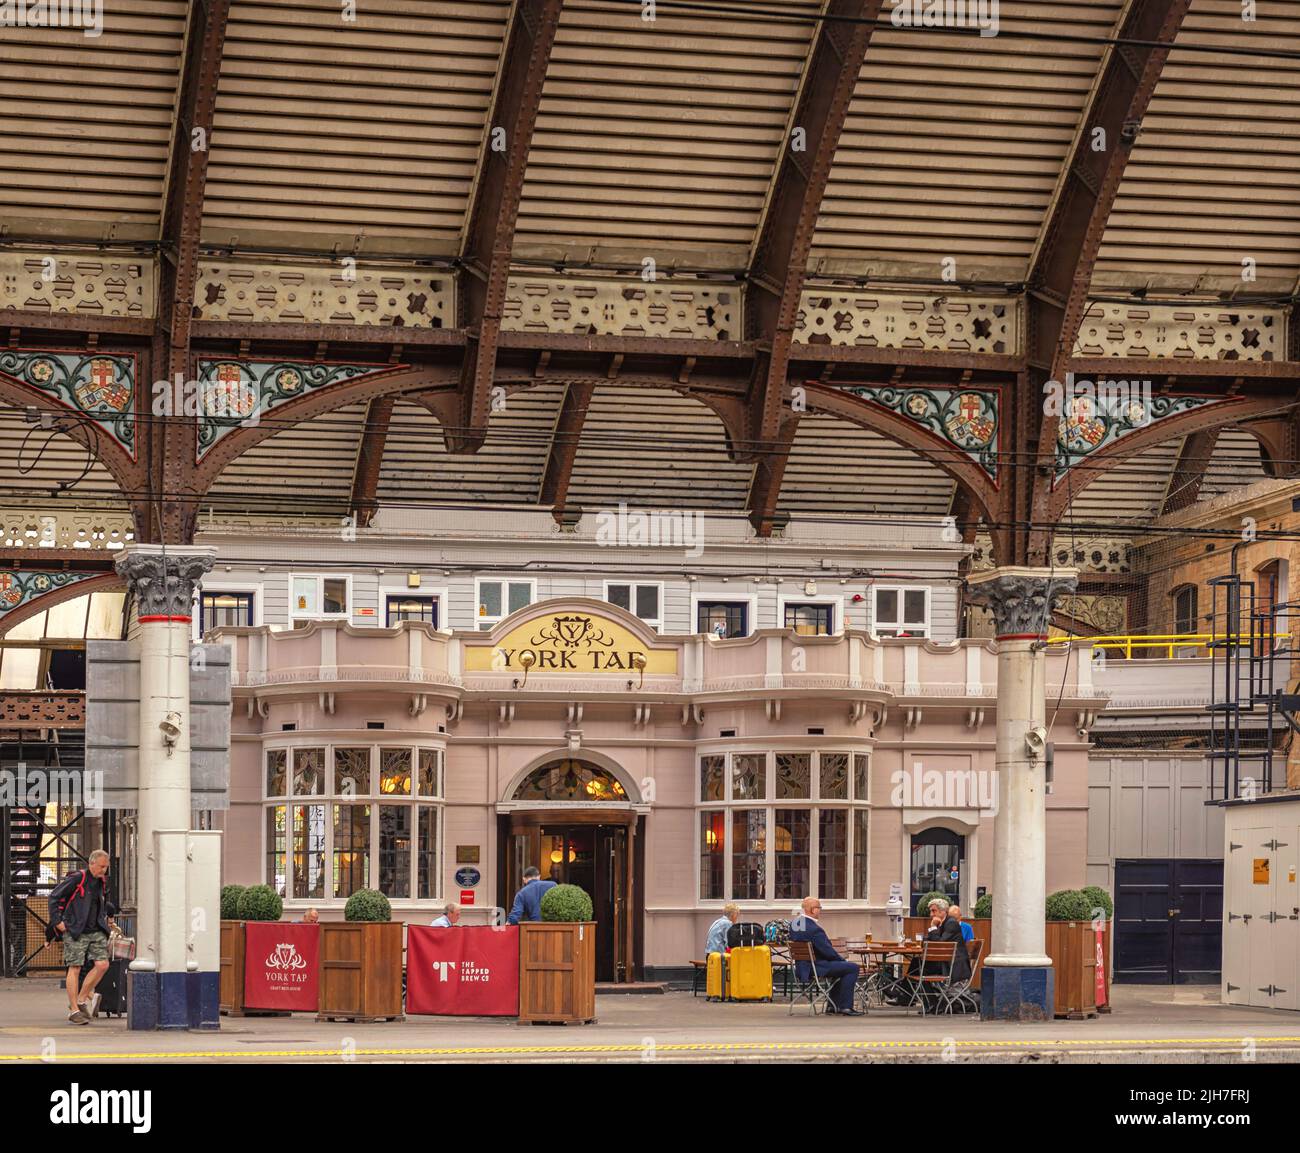 A pub is situated on a railway station platform under a historic canopy. People sit at tables and a passenger walks nearby. Stock Photo